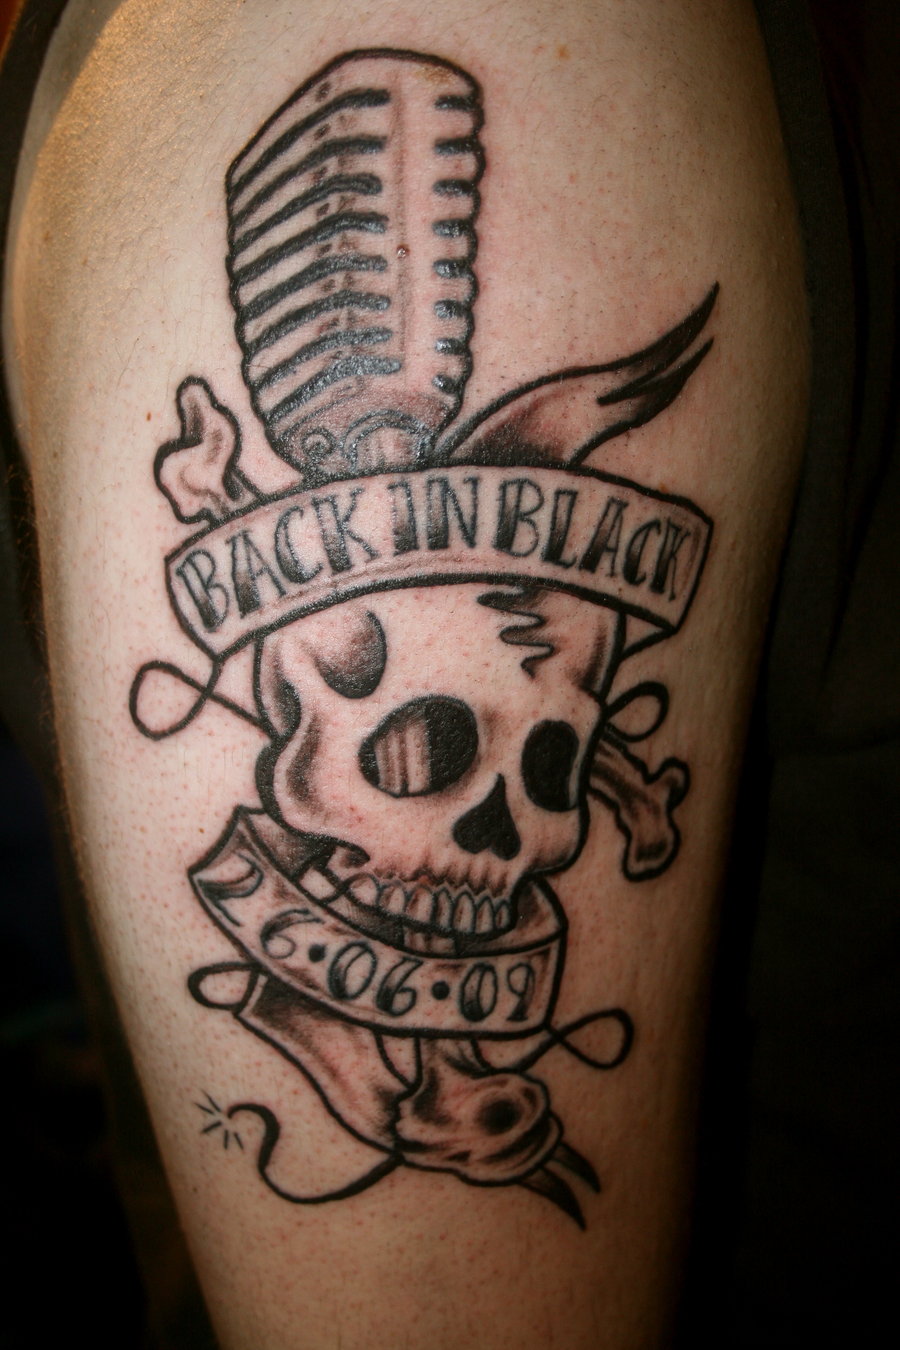 Back In Black Tattoo by itchysack on DeviantArt